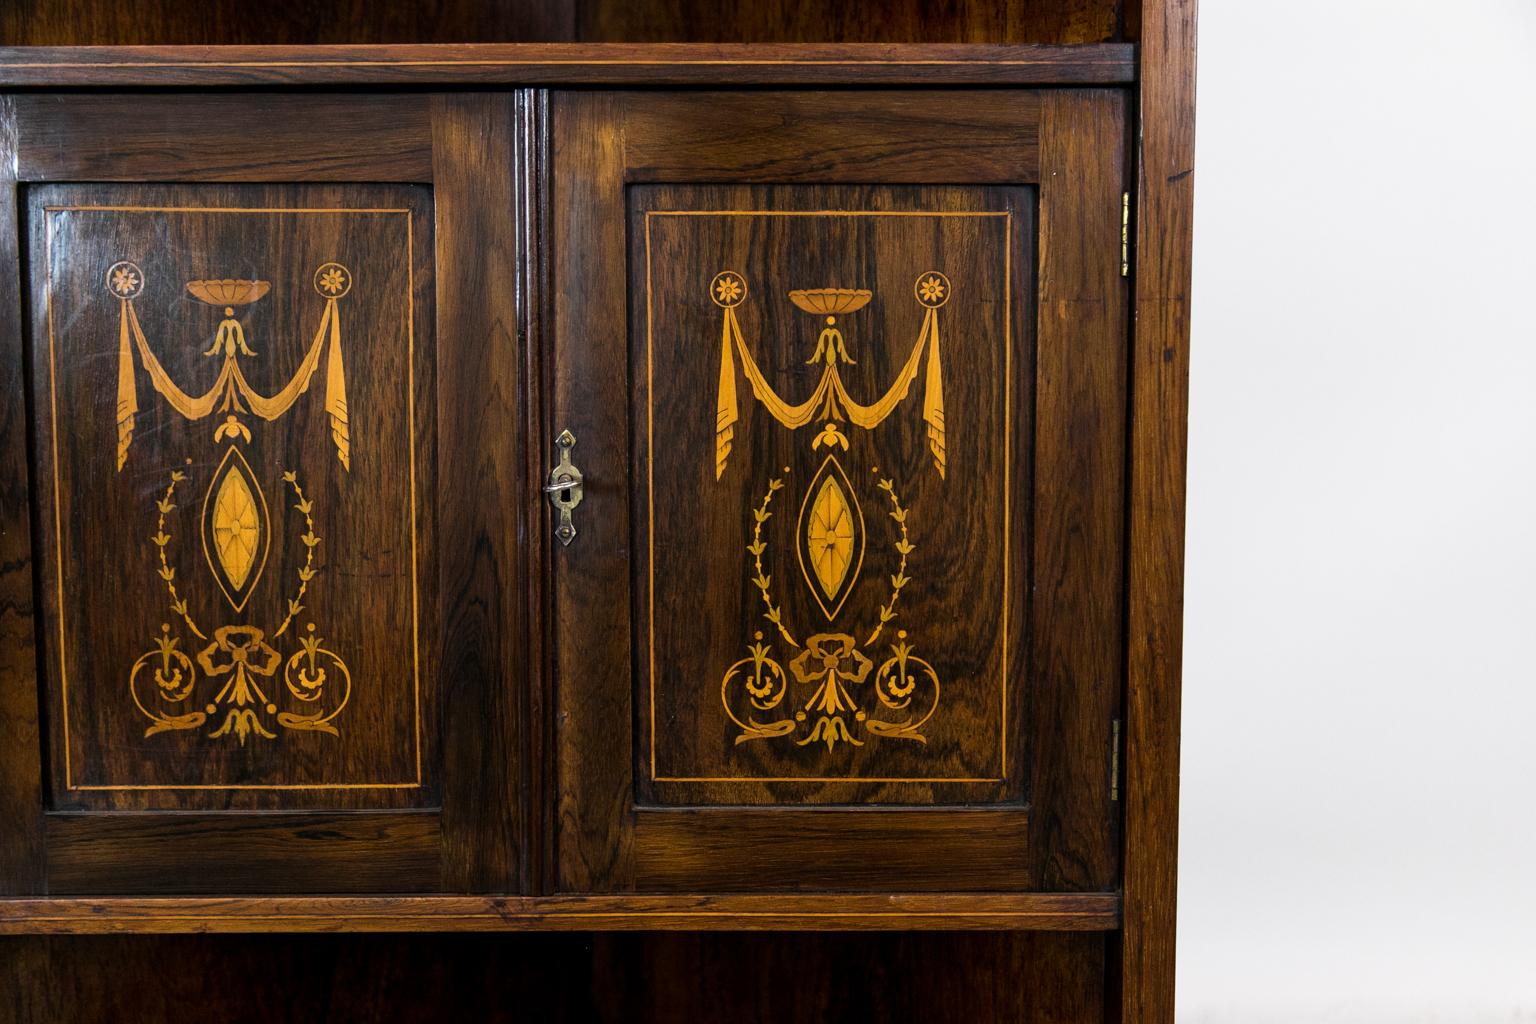 This English Edwardian rosewood corner cabinet is inlaid with fans, arabesques, and drapery swags. The upper section has opposing beveled glass mirrors with side panels with triple turned spindles, and all three top levels terminate in turned